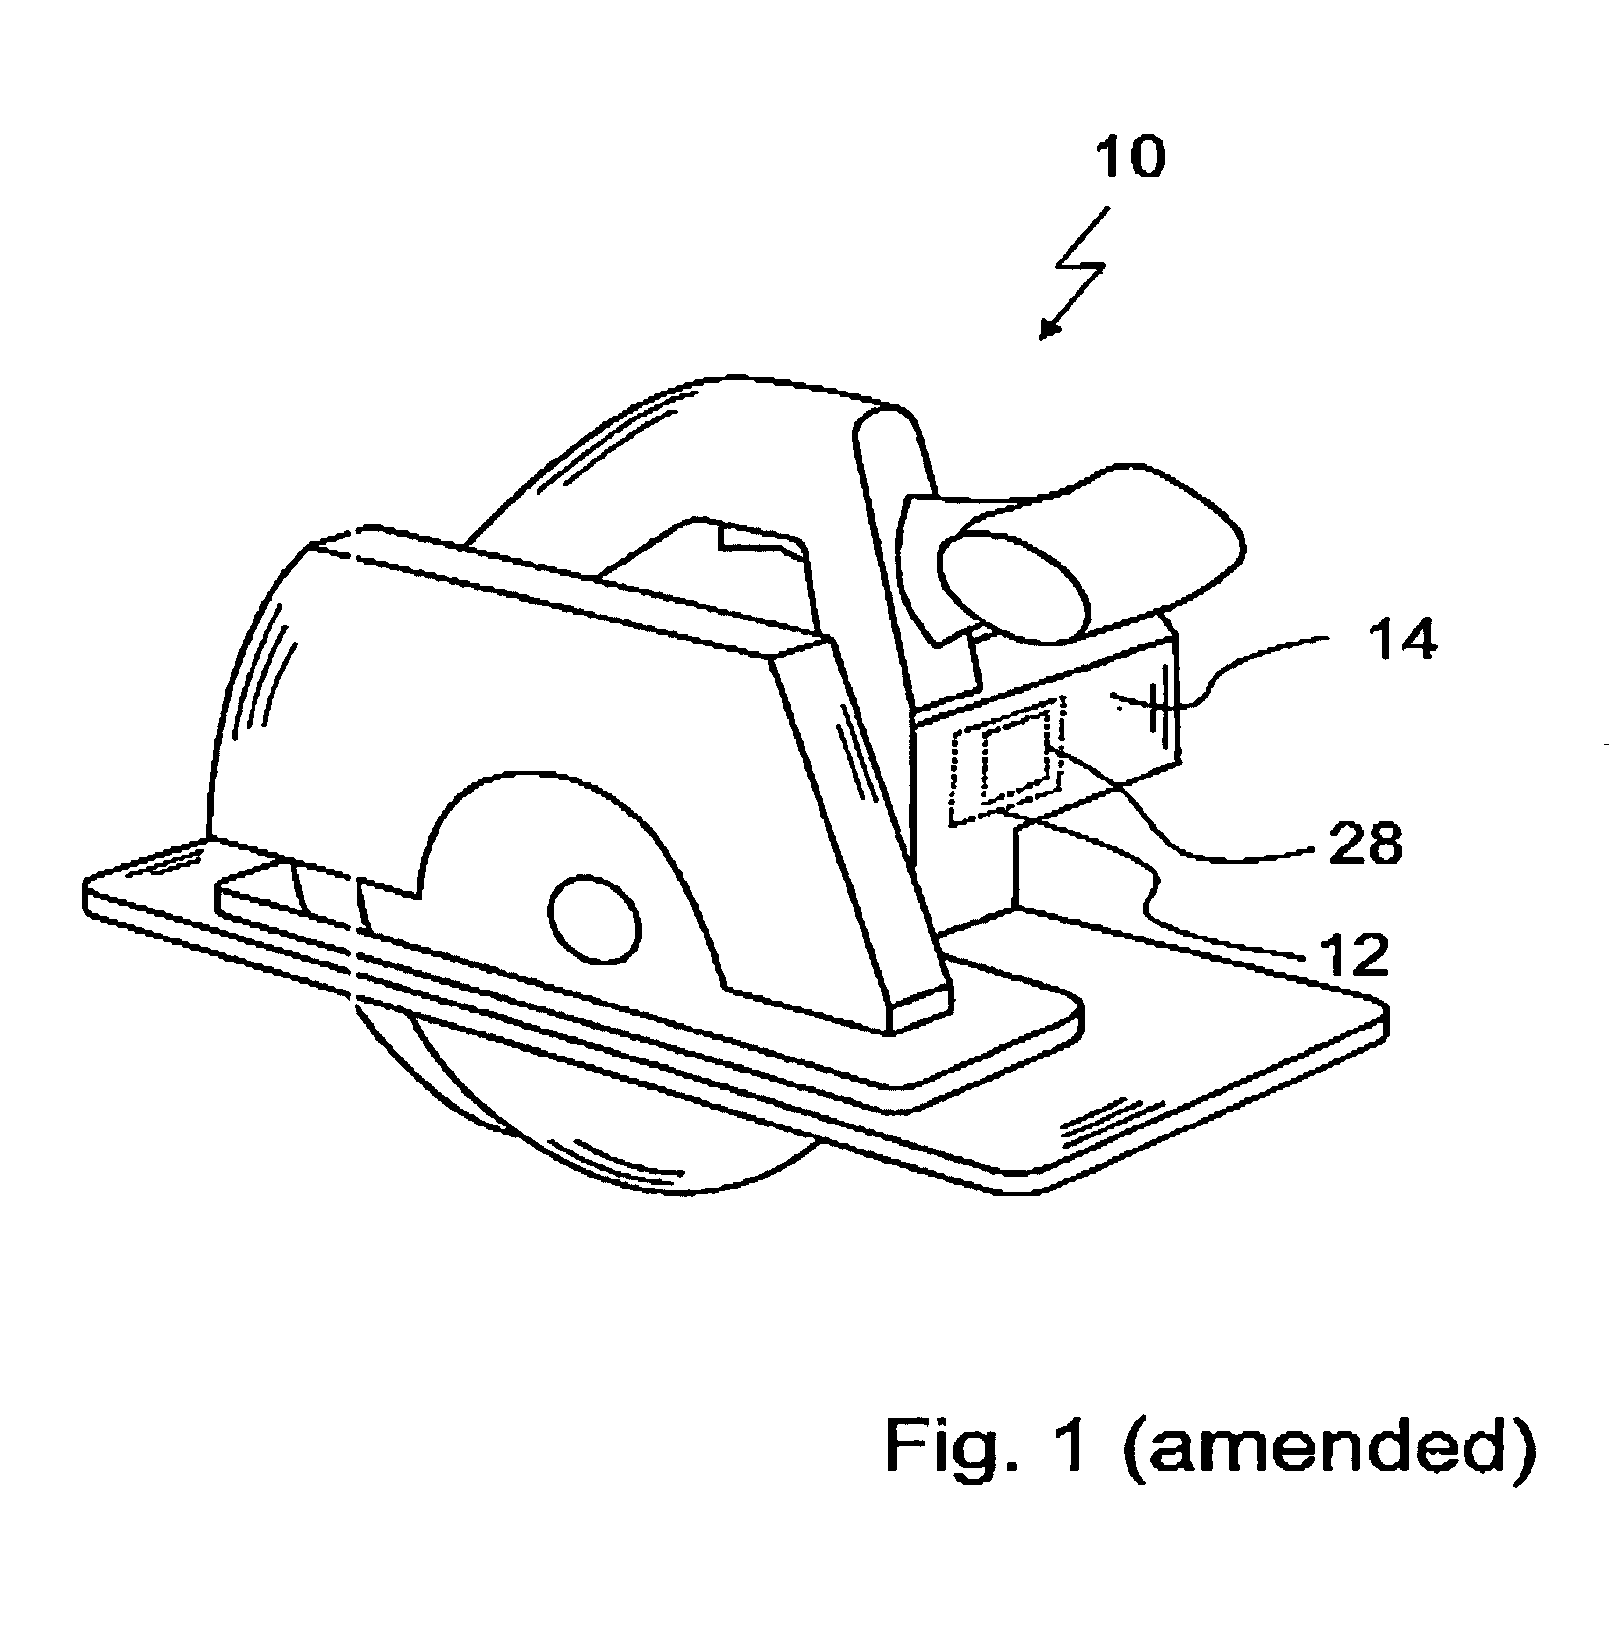 Braking device for an electric motor, electrical apparatus provided with the braking device, and a method of braking